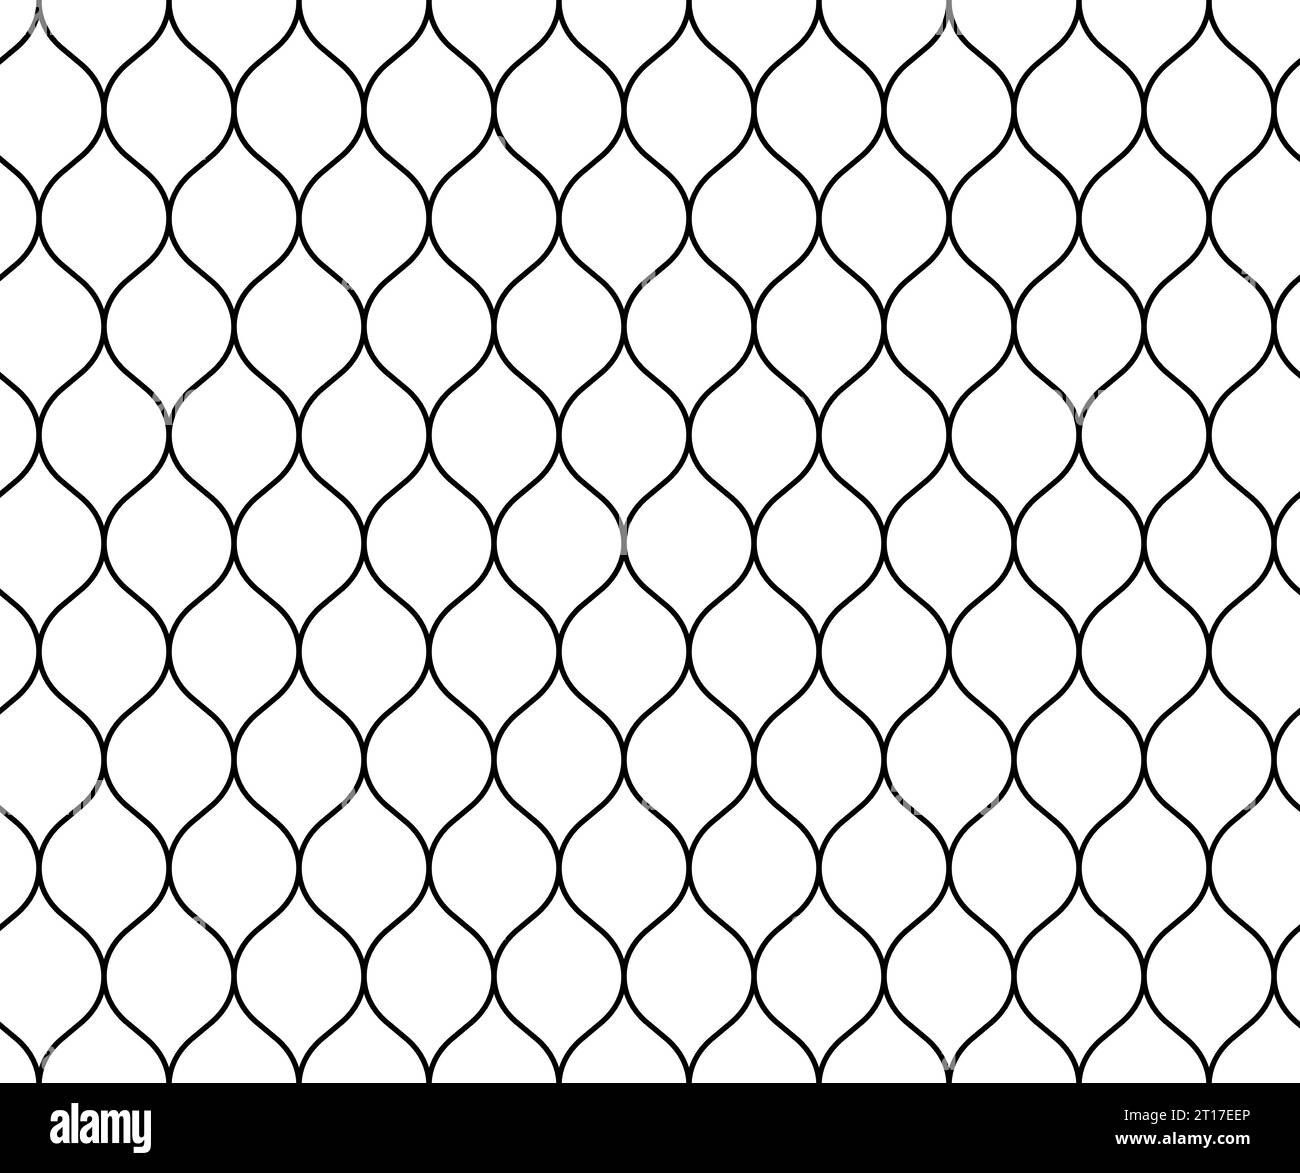 Fish fishing net Black and White Stock Photos & Images - Page 2 - Alamy